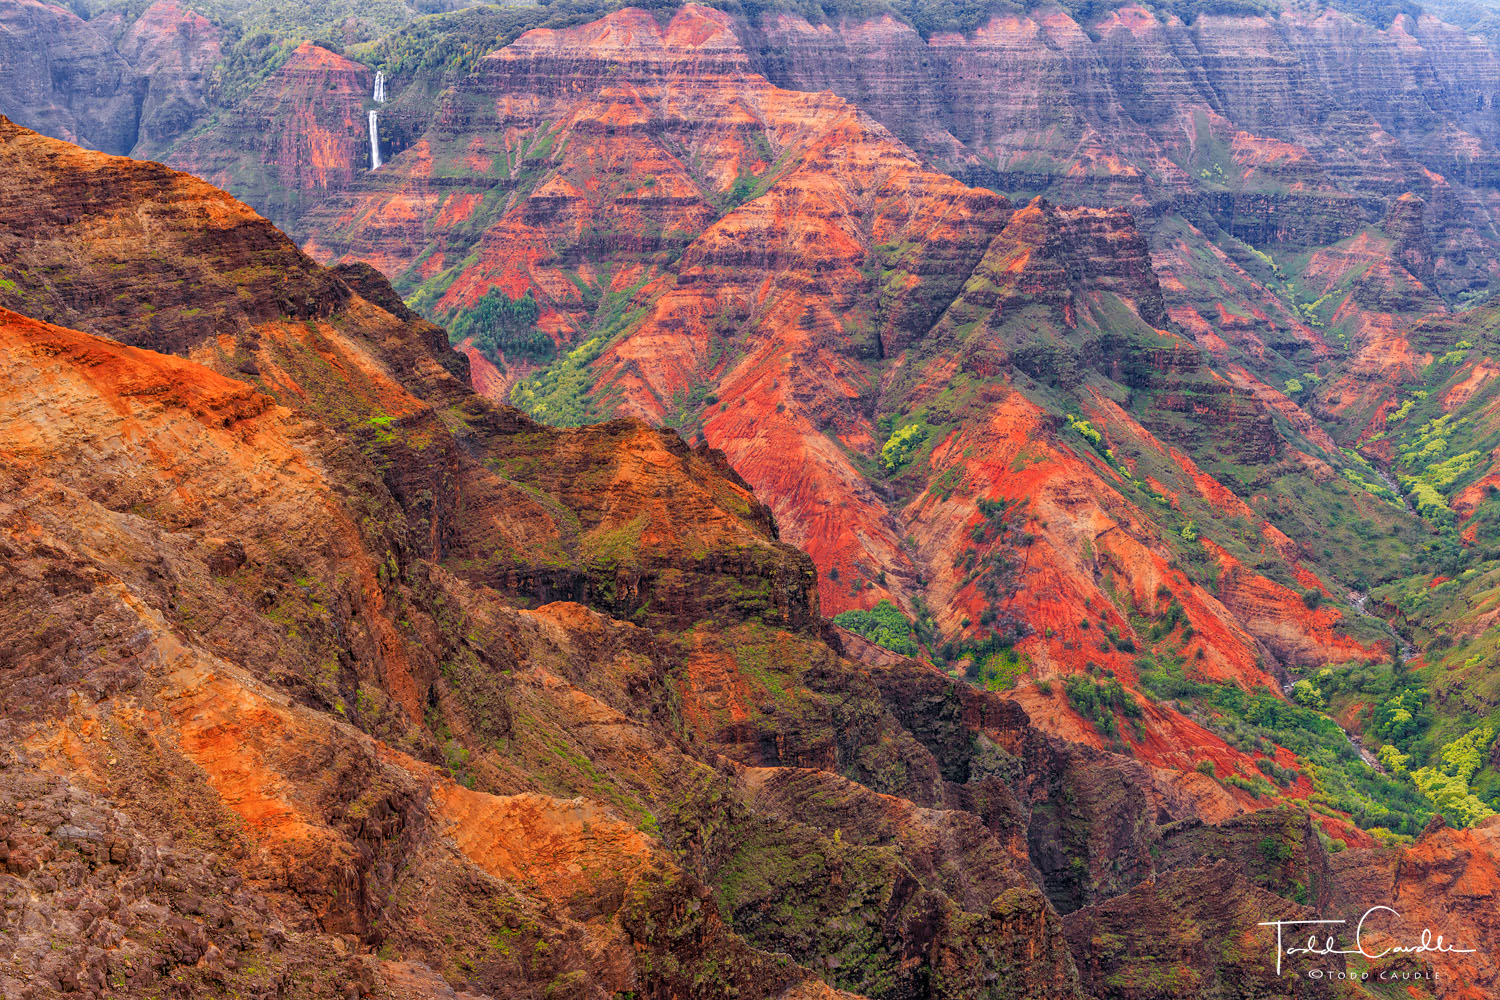 Waimea Canyon, one of the most beautiful places I've ever seen.